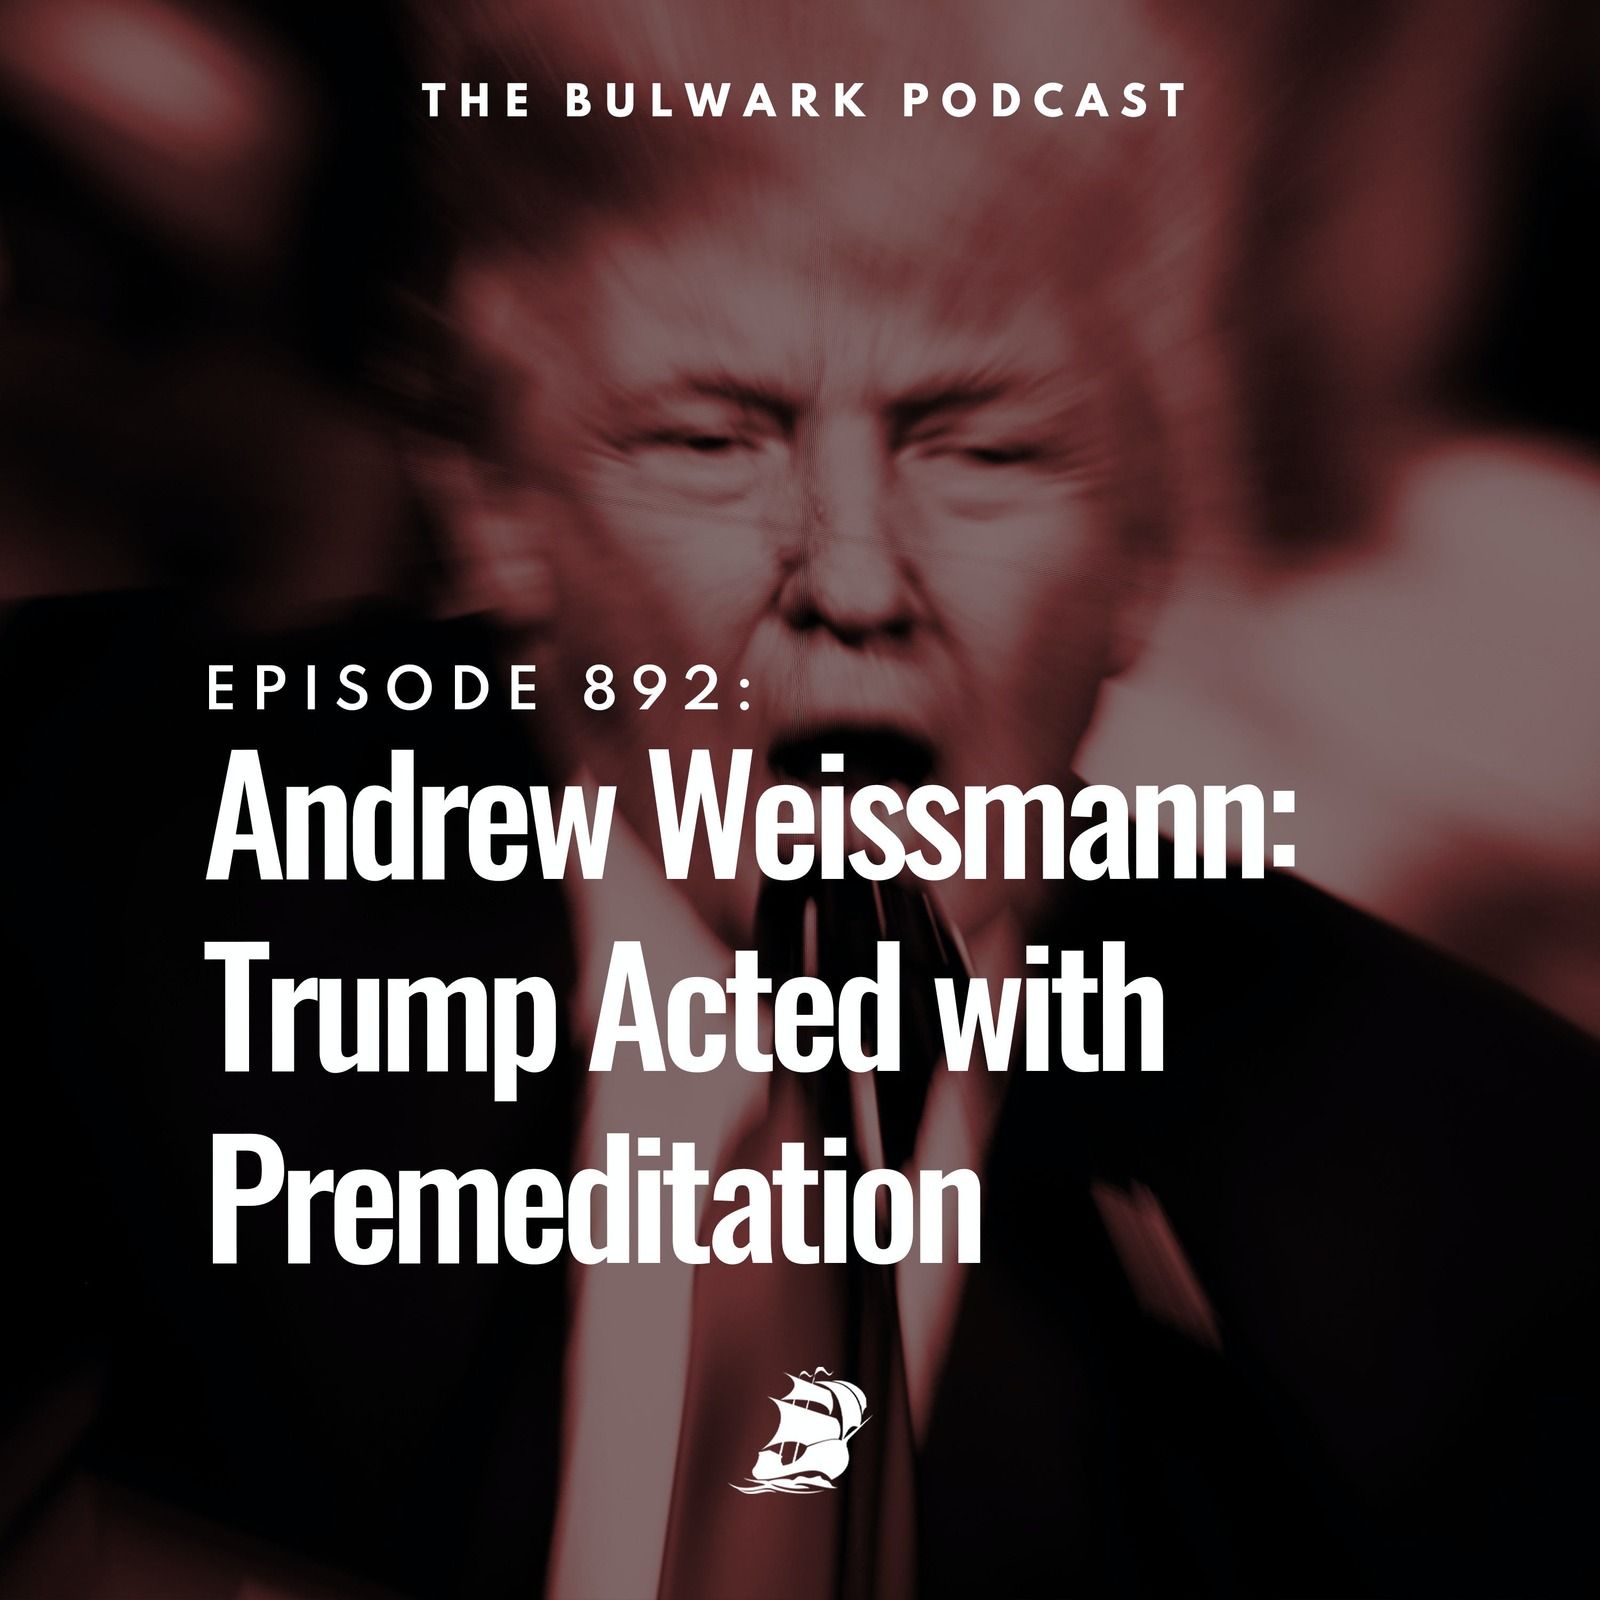 Andrew Weissmann: Trump Acted with Premeditation